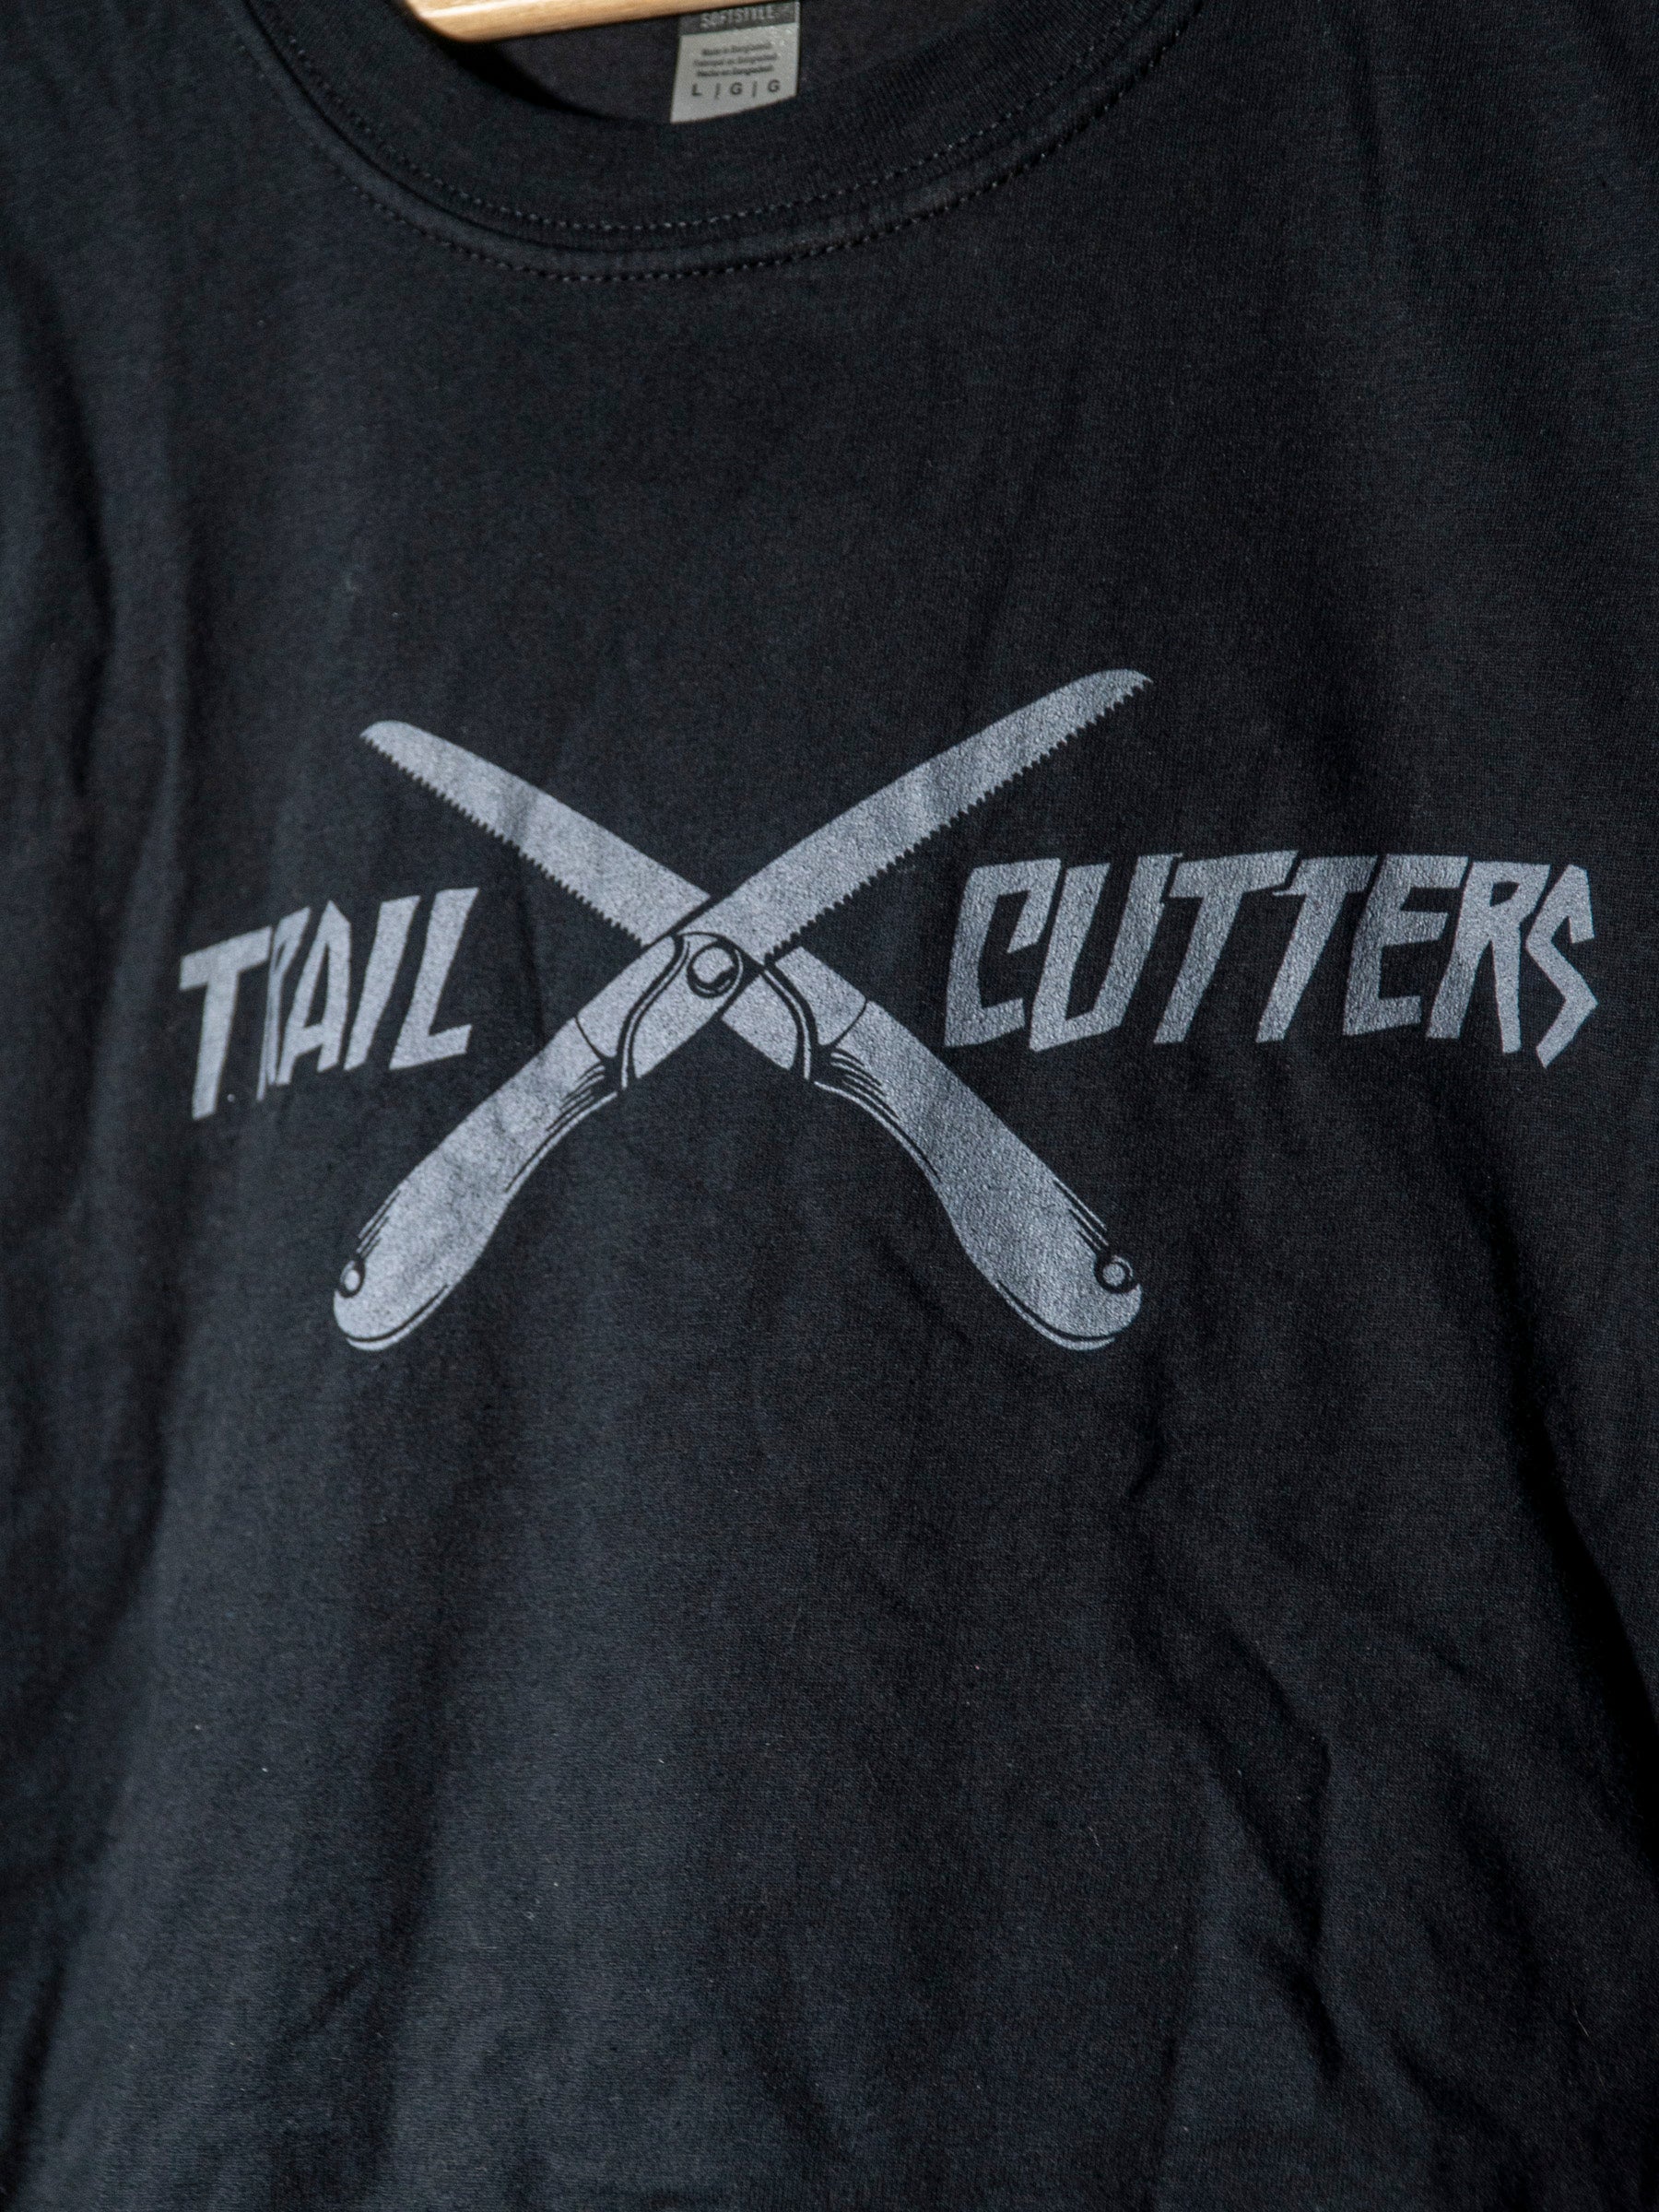 Trailcutters Hand Saw